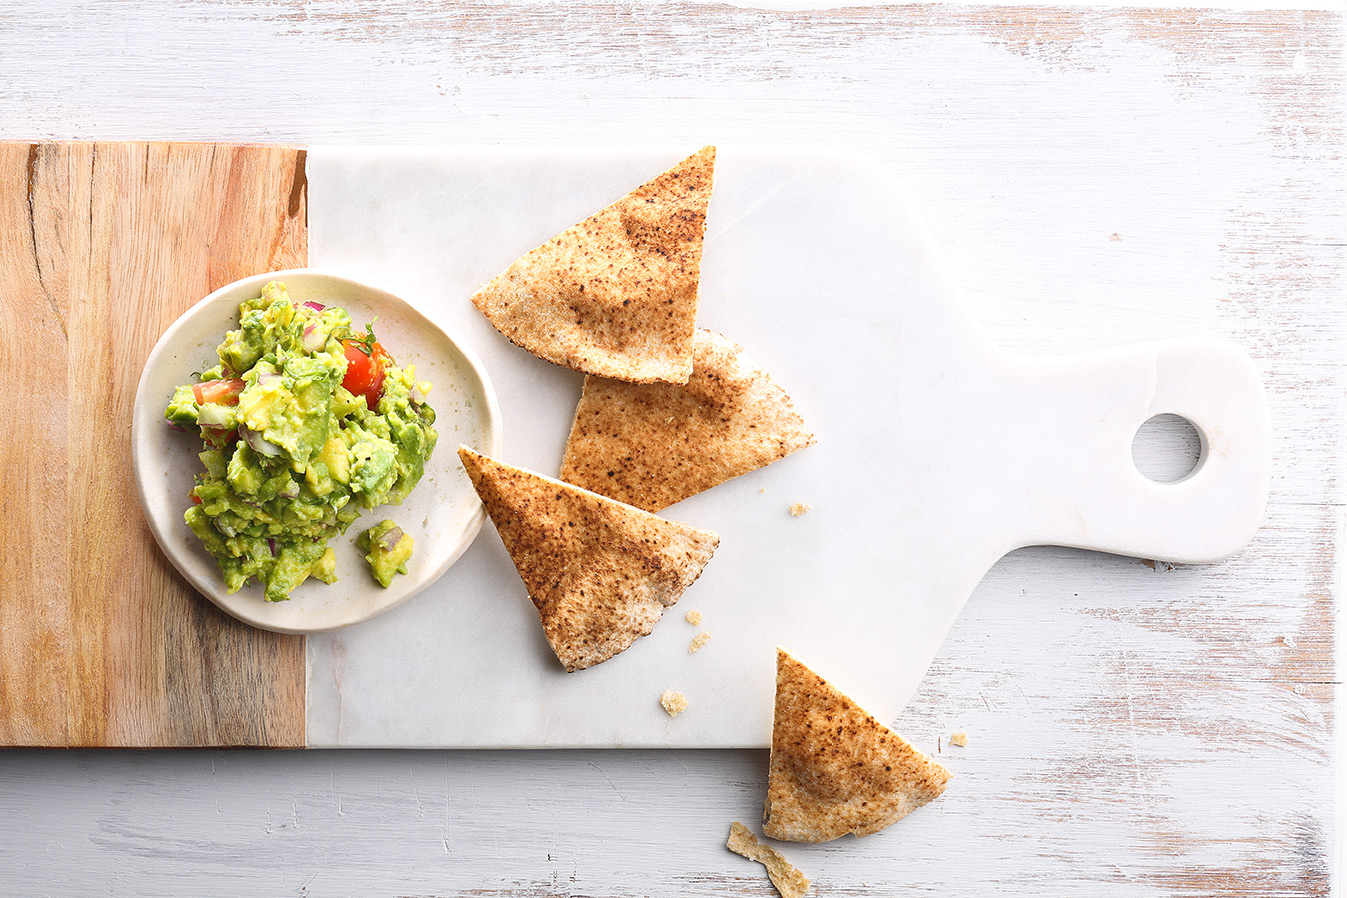 Image of a guacamole recipe in a small white bowl served on a white and wooden cutting board with baked pita triangles on the side